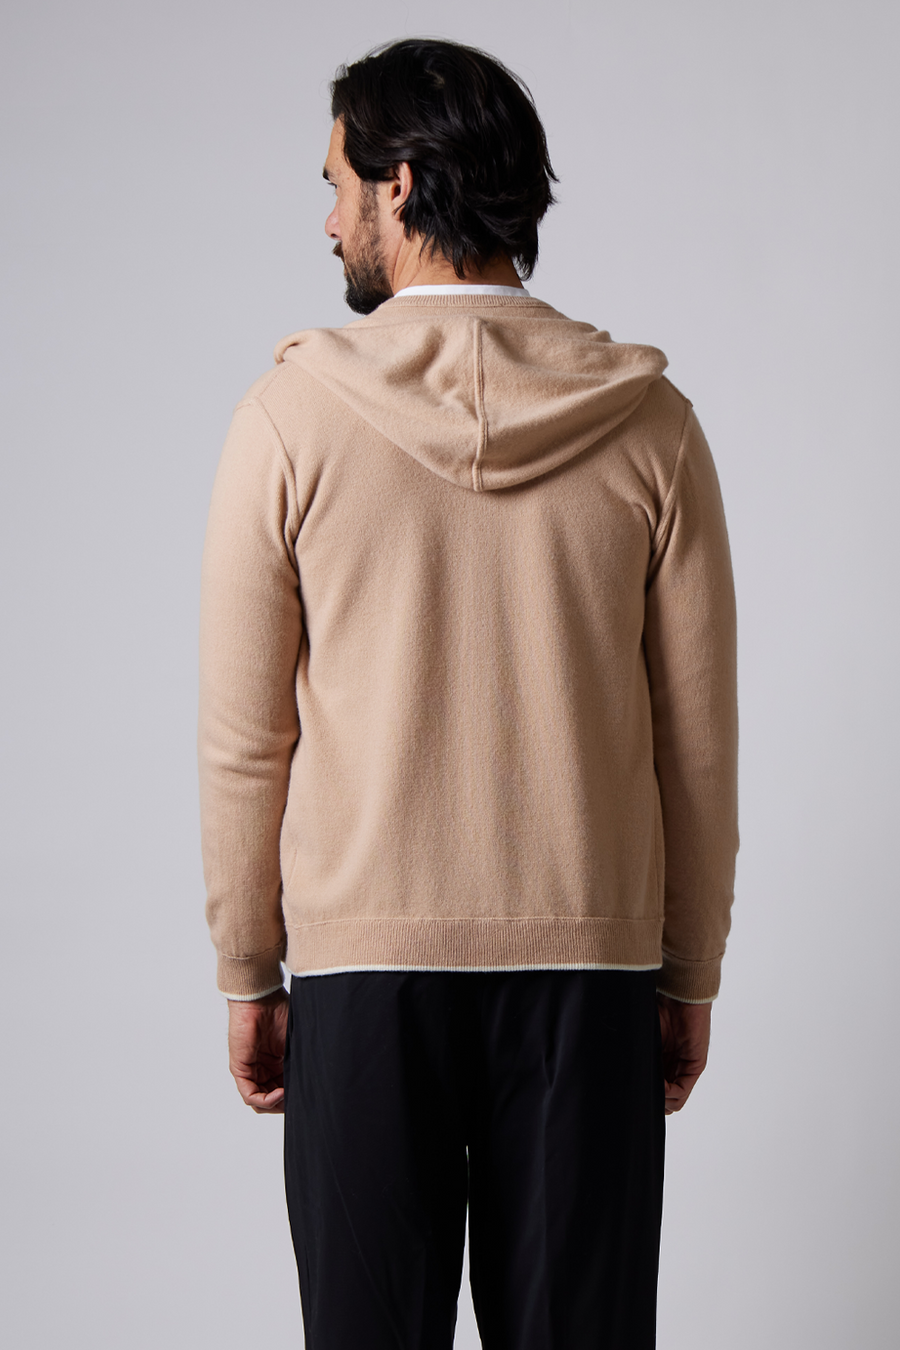 Buy the Daniele Fiesoli Zip-Up Wool Hoodie Beige at Intro. Spend £50 for free UK delivery. Official stockists. We ship worldwide.